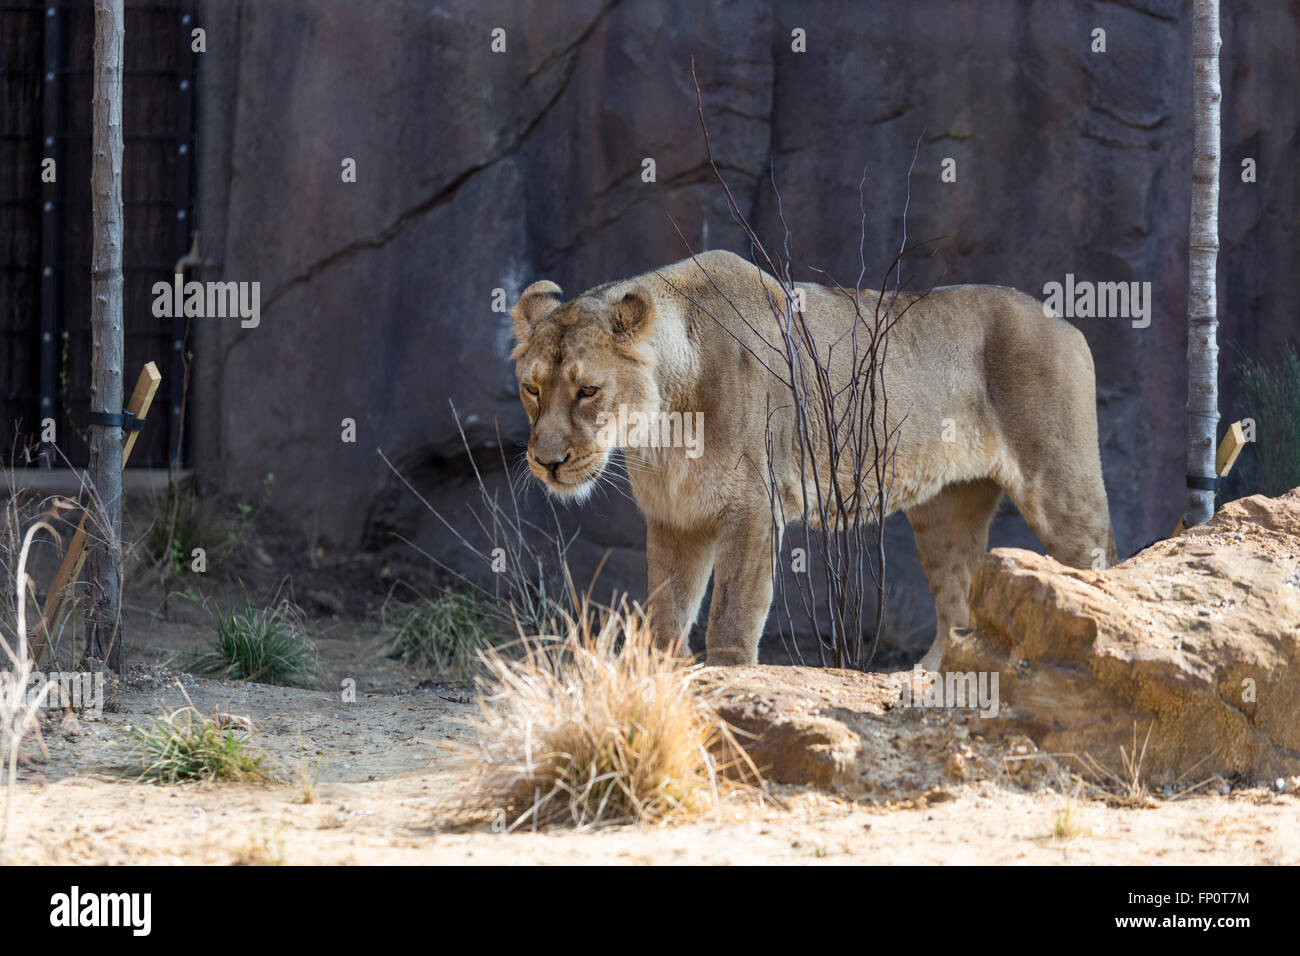 London, UK. 17 March 2016. ZSL London Zoo presents Land of the Lions, a ...